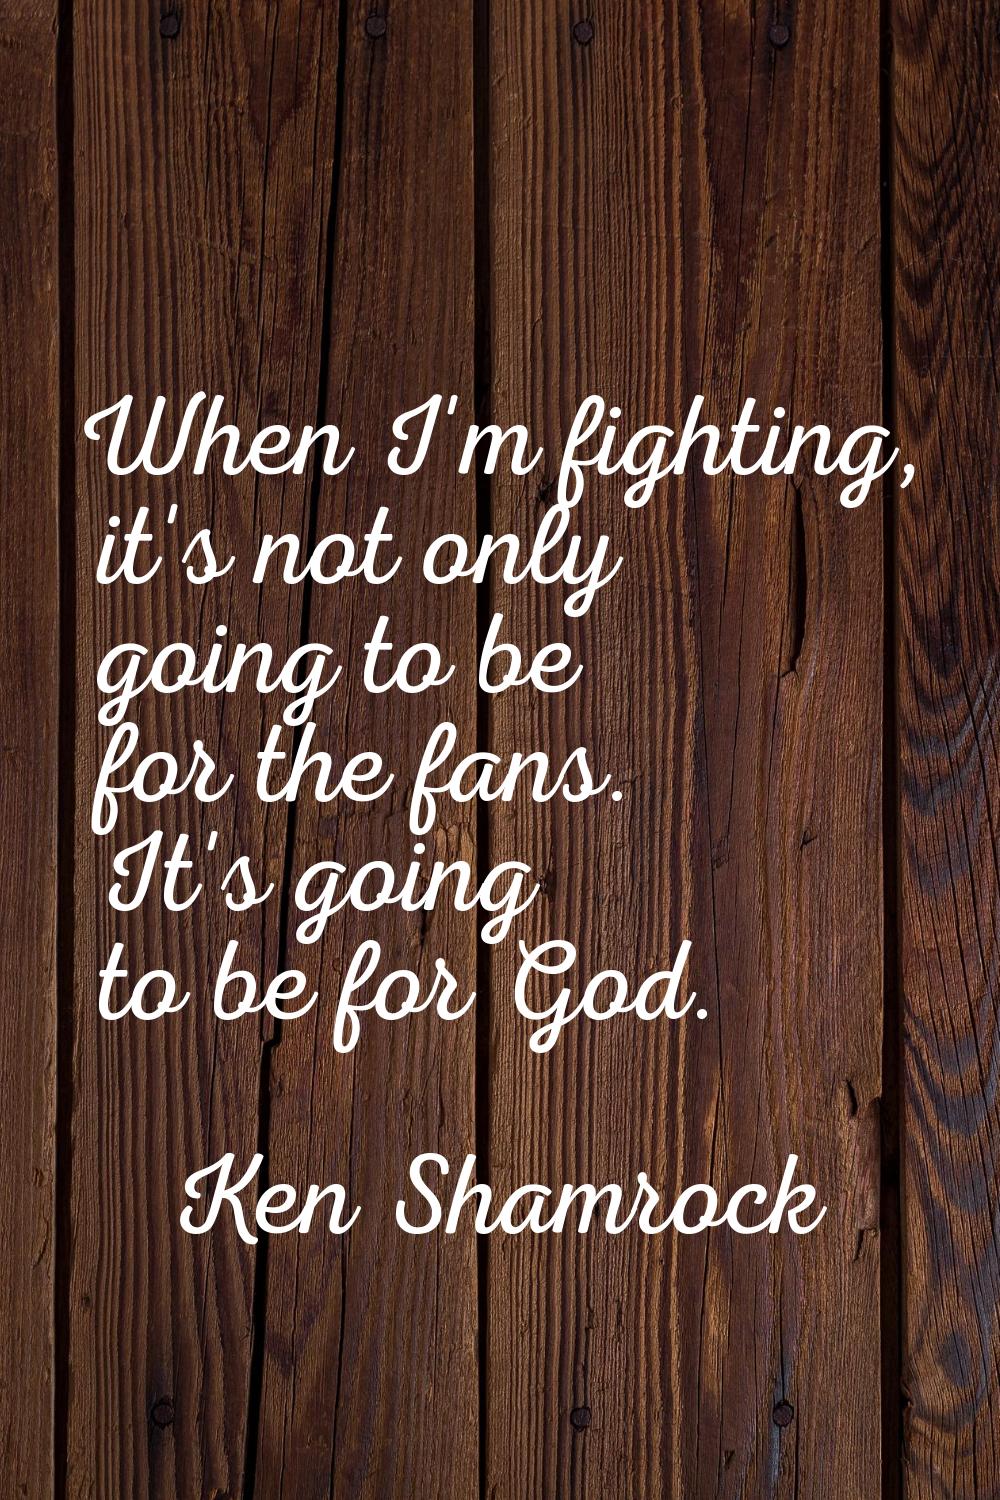 When I'm fighting, it's not only going to be for the fans. It's going to be for God.